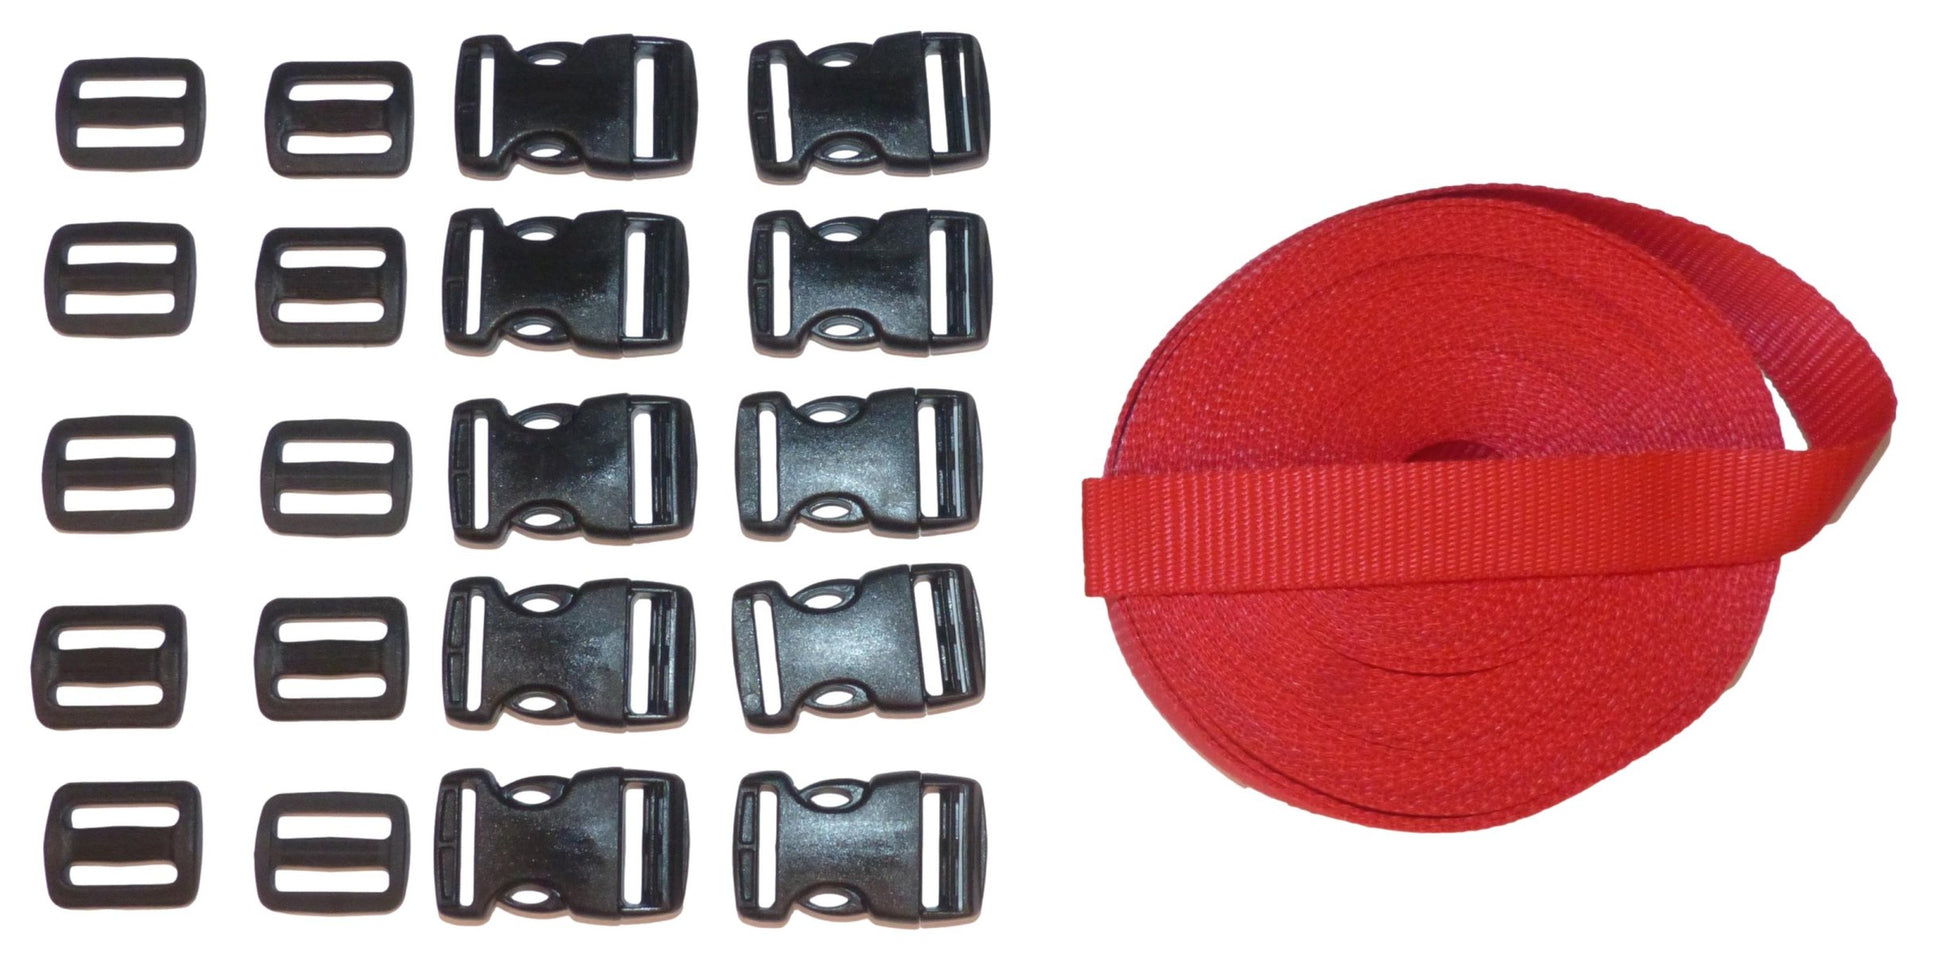 Benristraps 25mm Heavy-Duty Webbing and Branded  Buckle Sets for Straps, Bags, Crafts in red